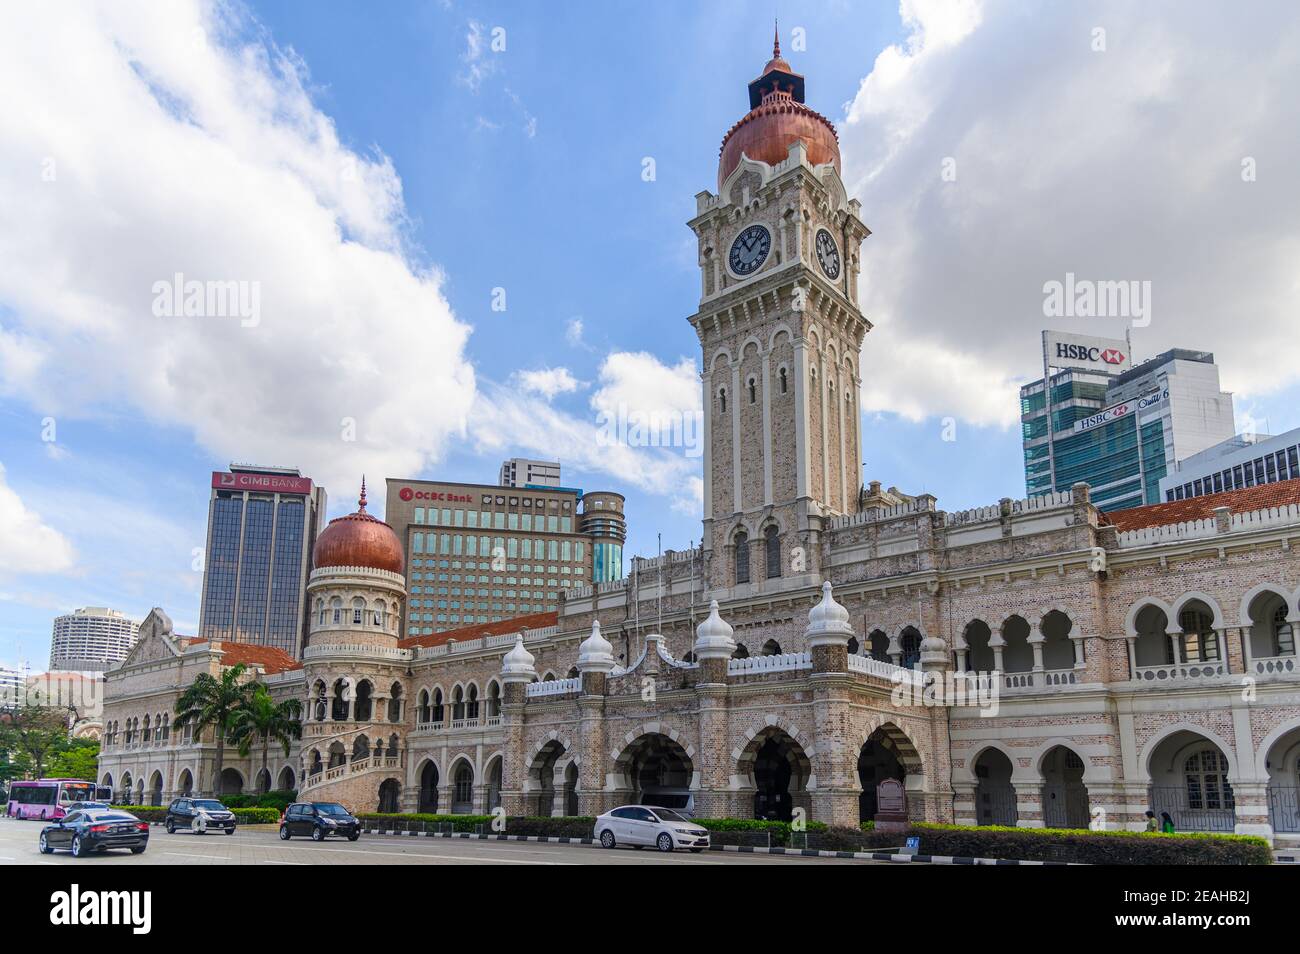 The Sultan Abdul Samad Building by Independence Square in Kuala Lumpur, Malaysia Stock Photo